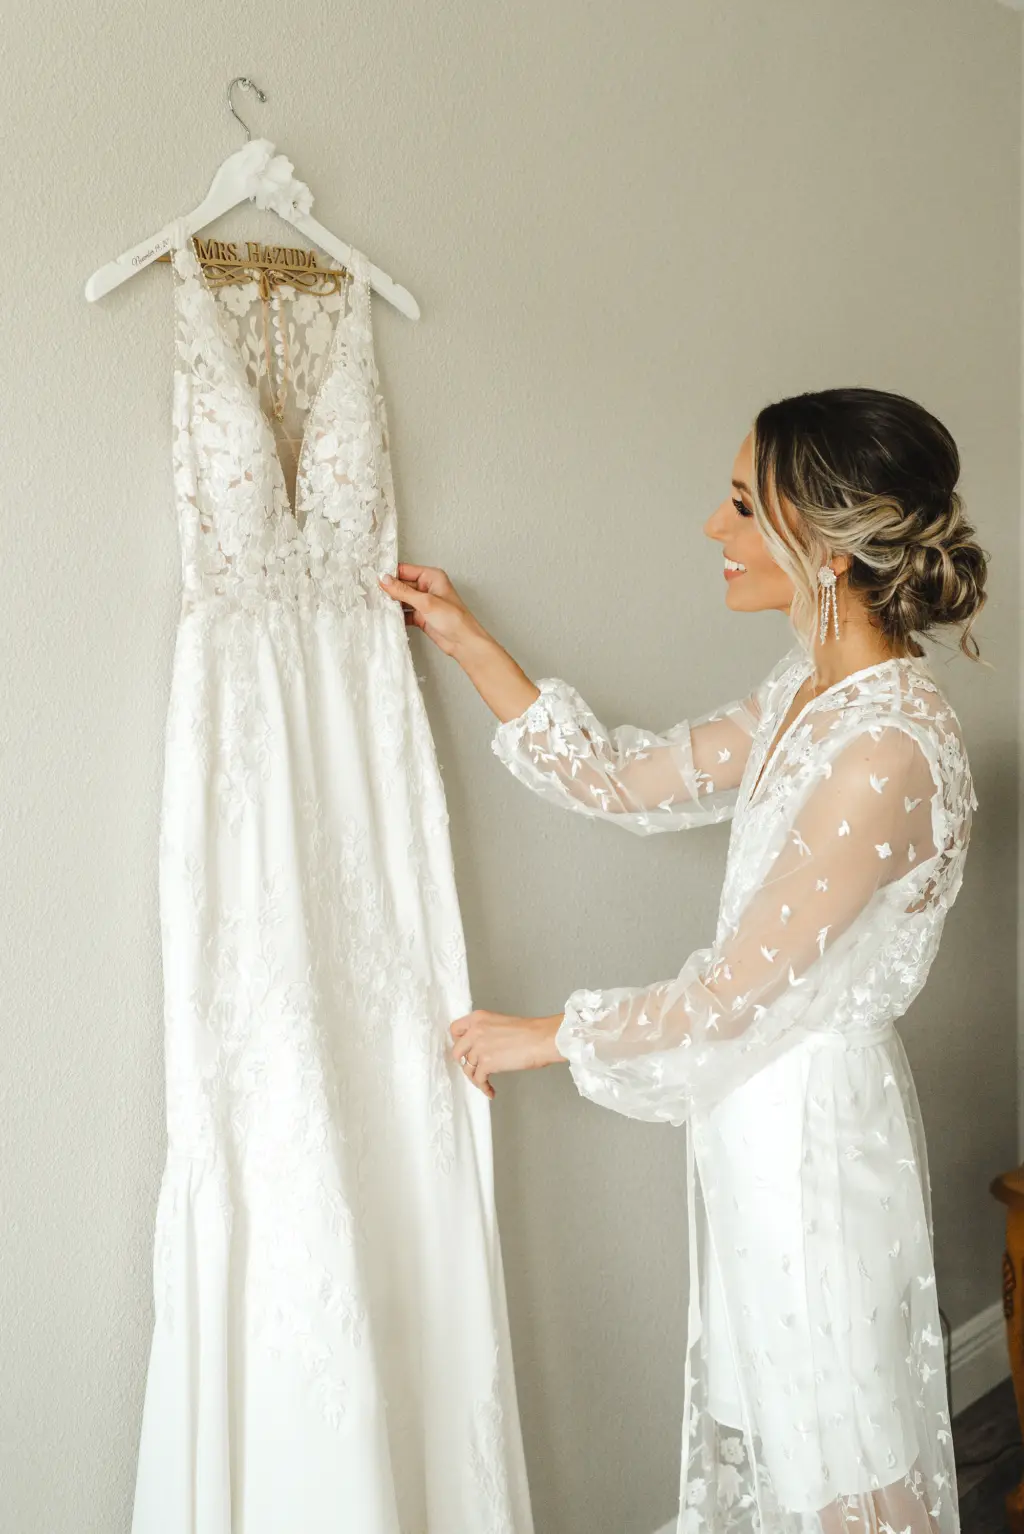 Bride Getting Ready Wedding Portrait | White Fit and Flare Pronovias Wedding Dress with Lace Bodice and Keyhole Back Inspiration